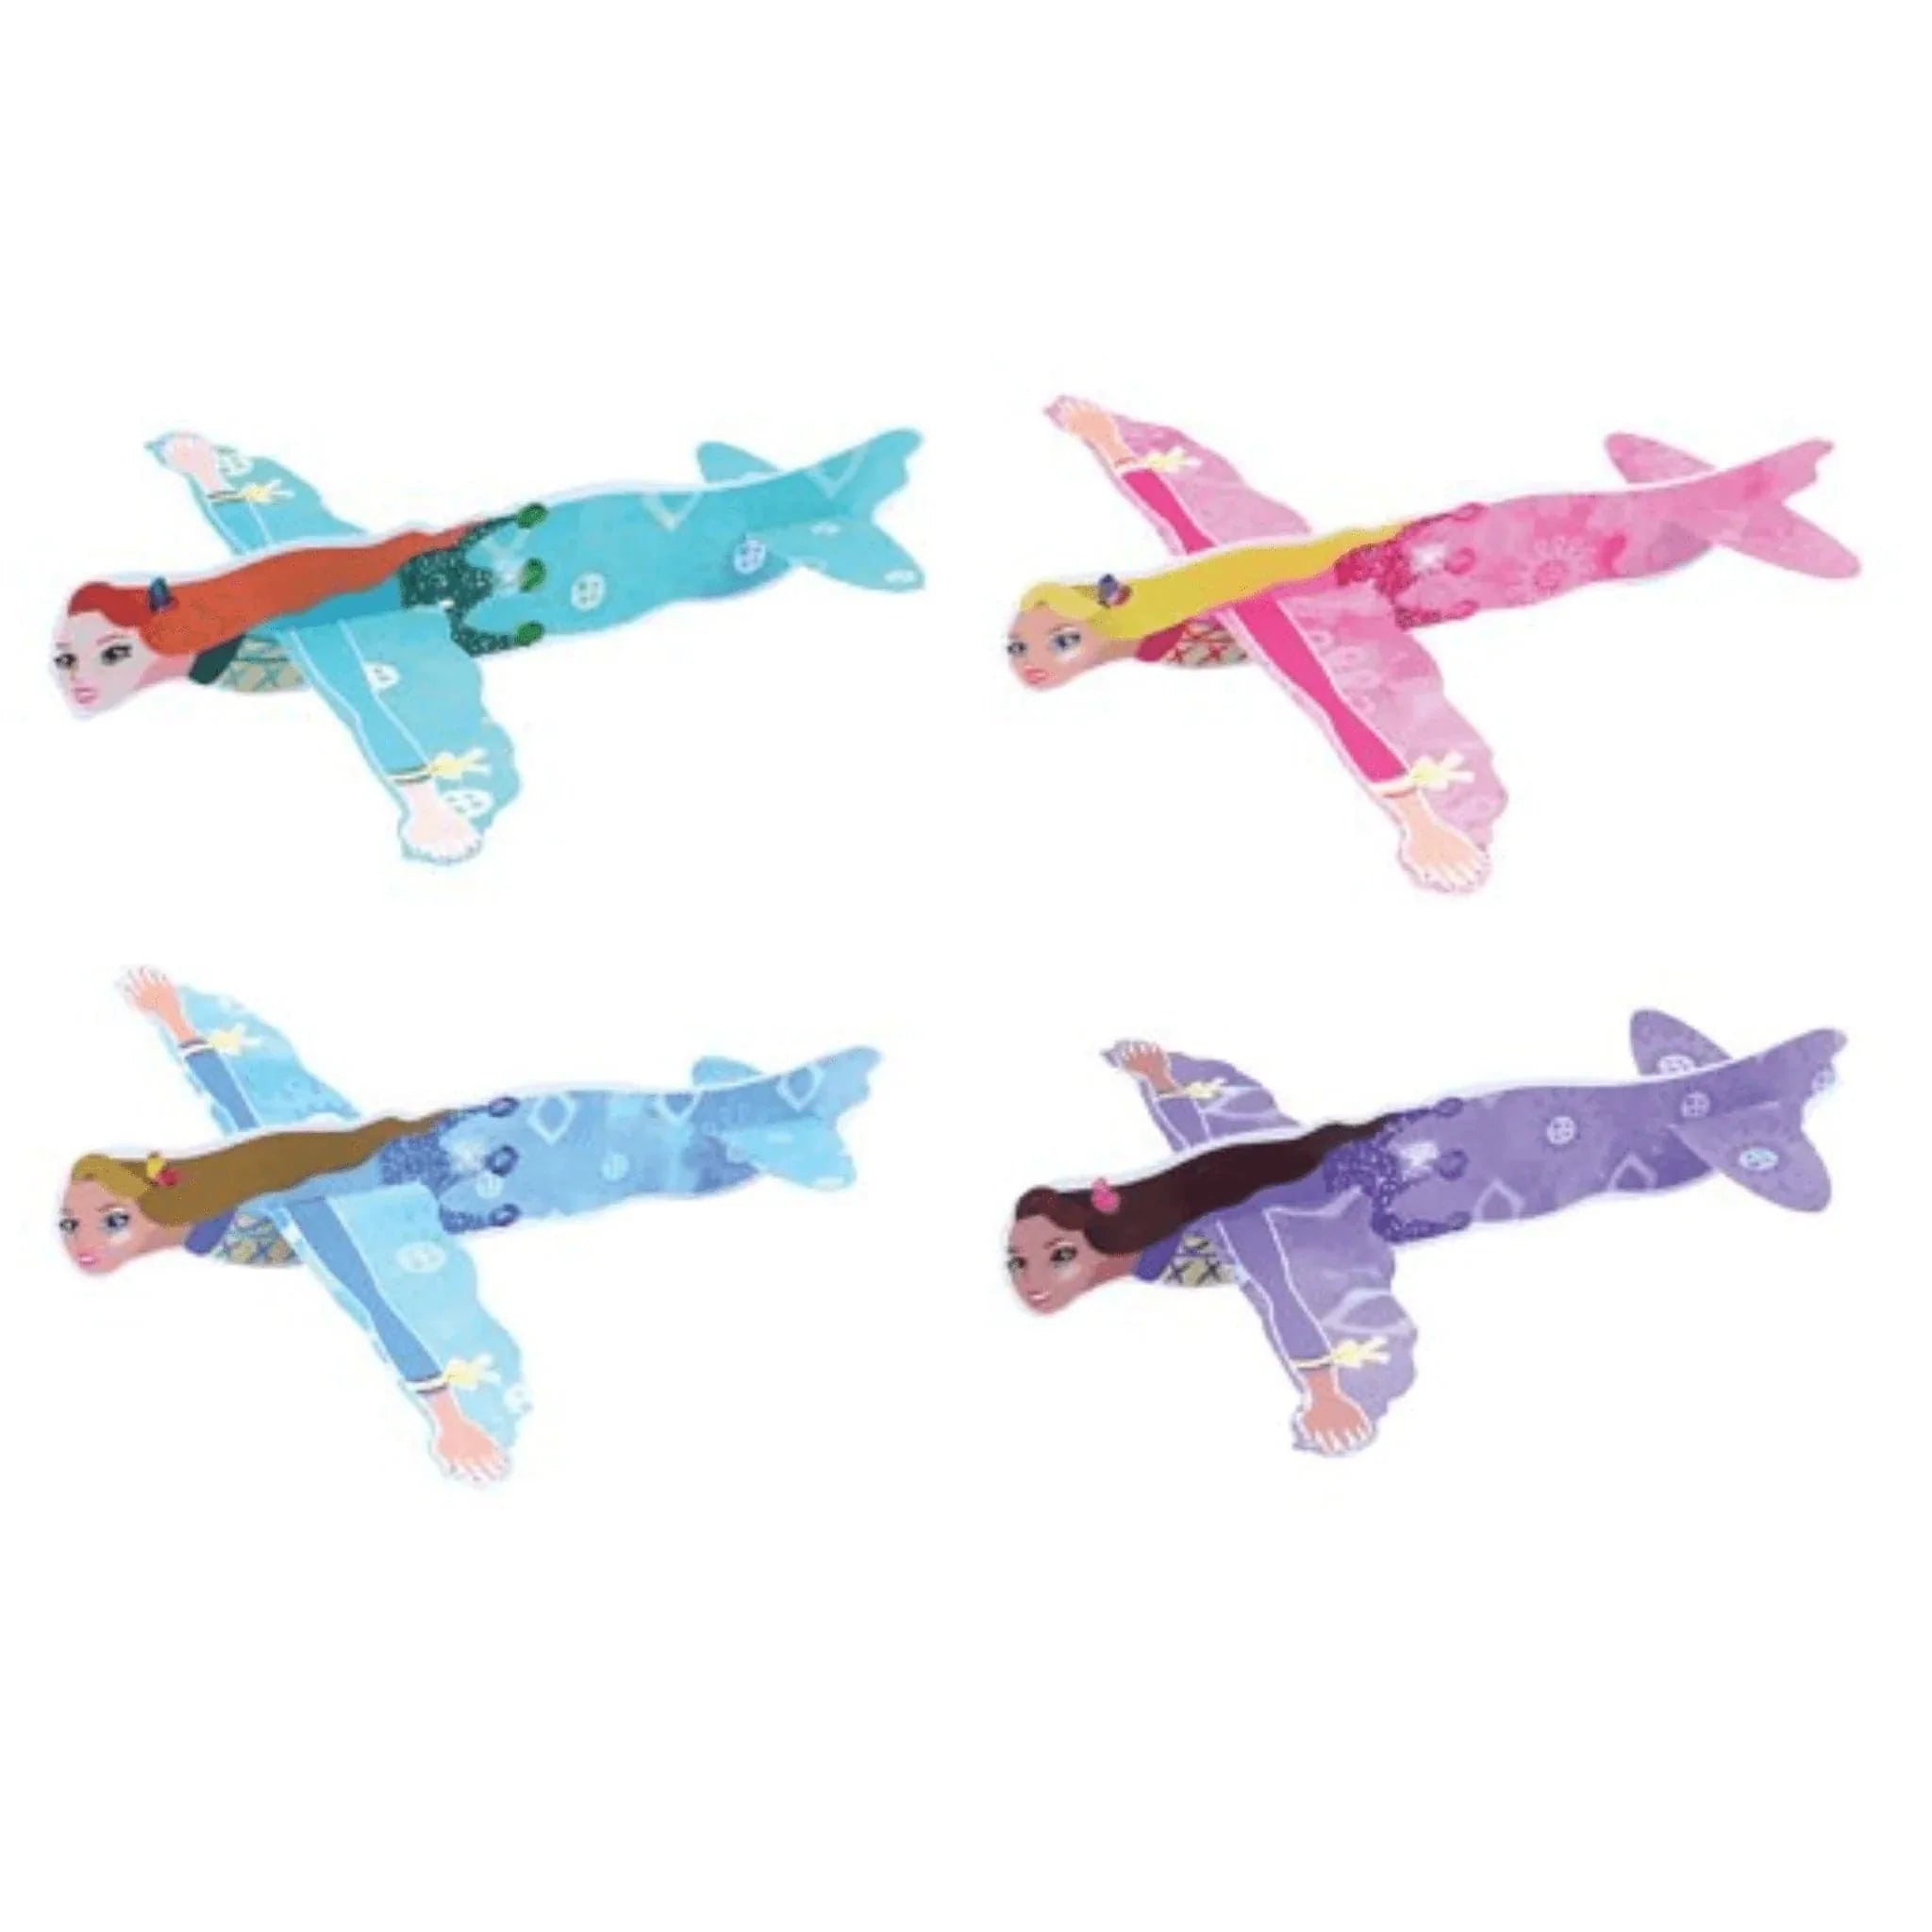 Princess Gliders - Kids Party Craft